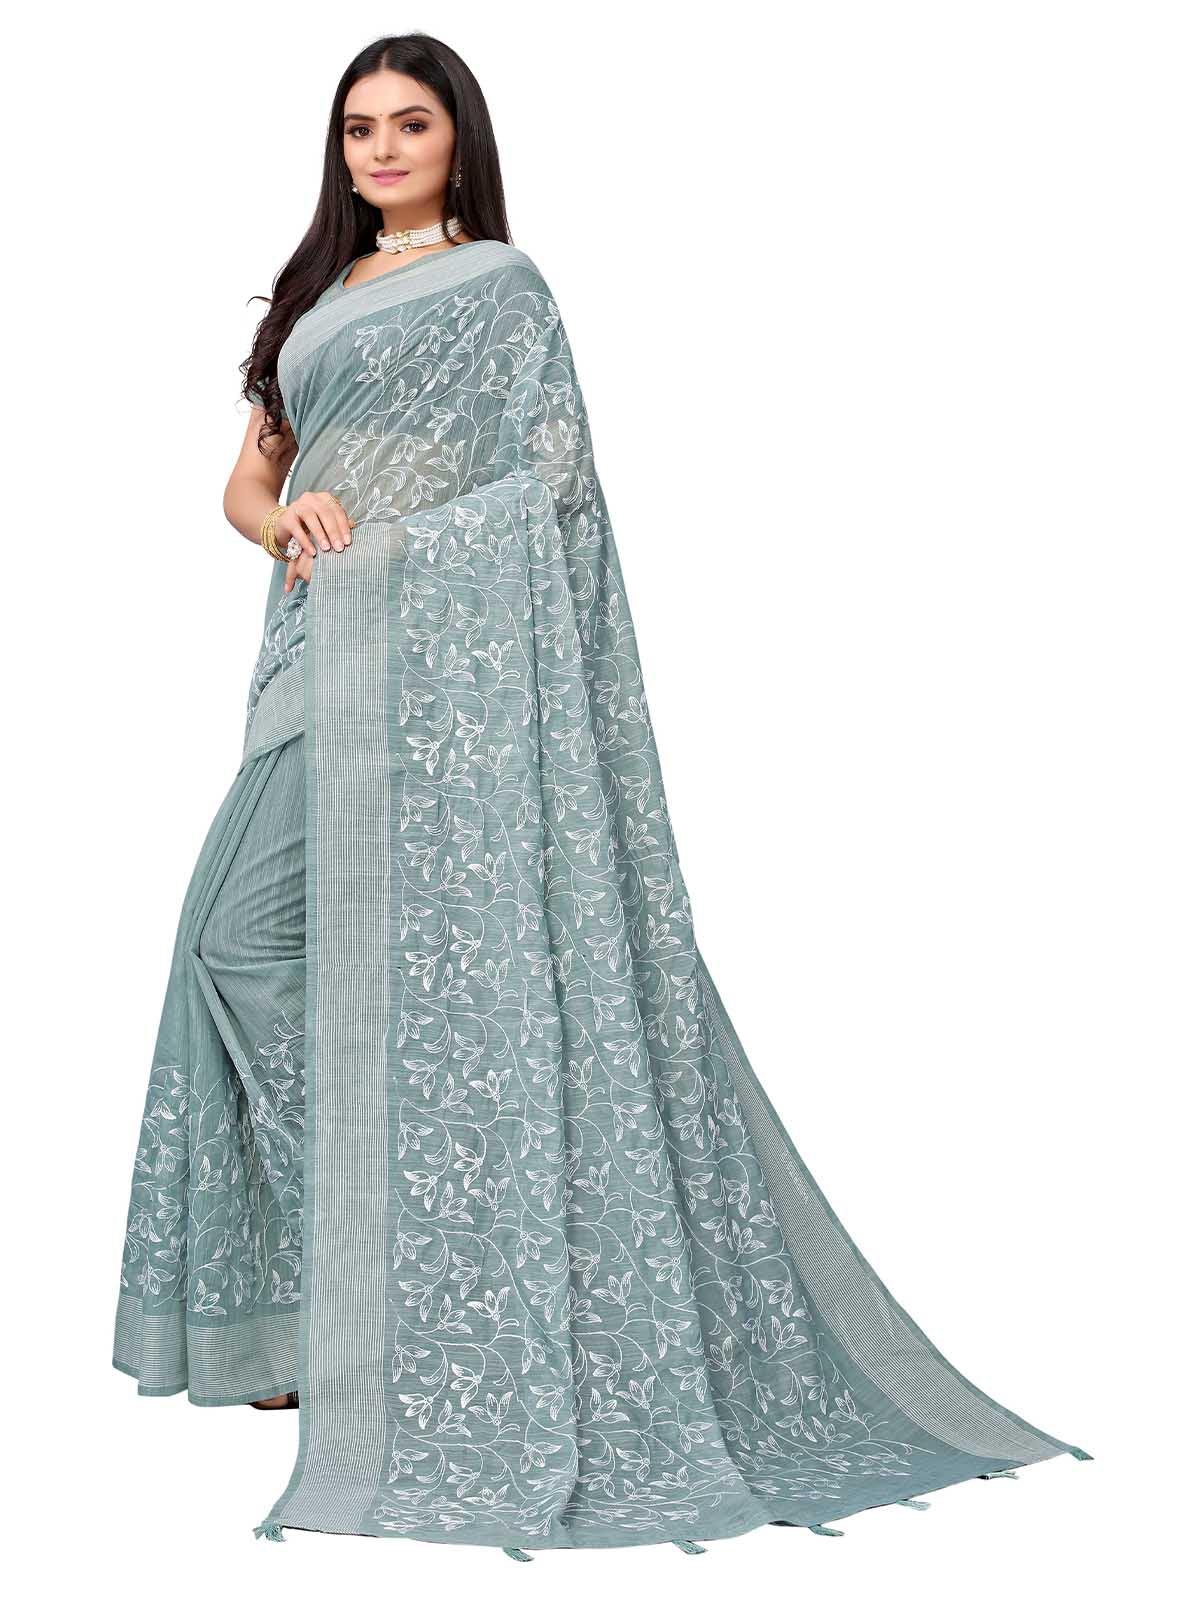 Women's Blue Pure Cotton Embroidered Saree With Blouse - Odette